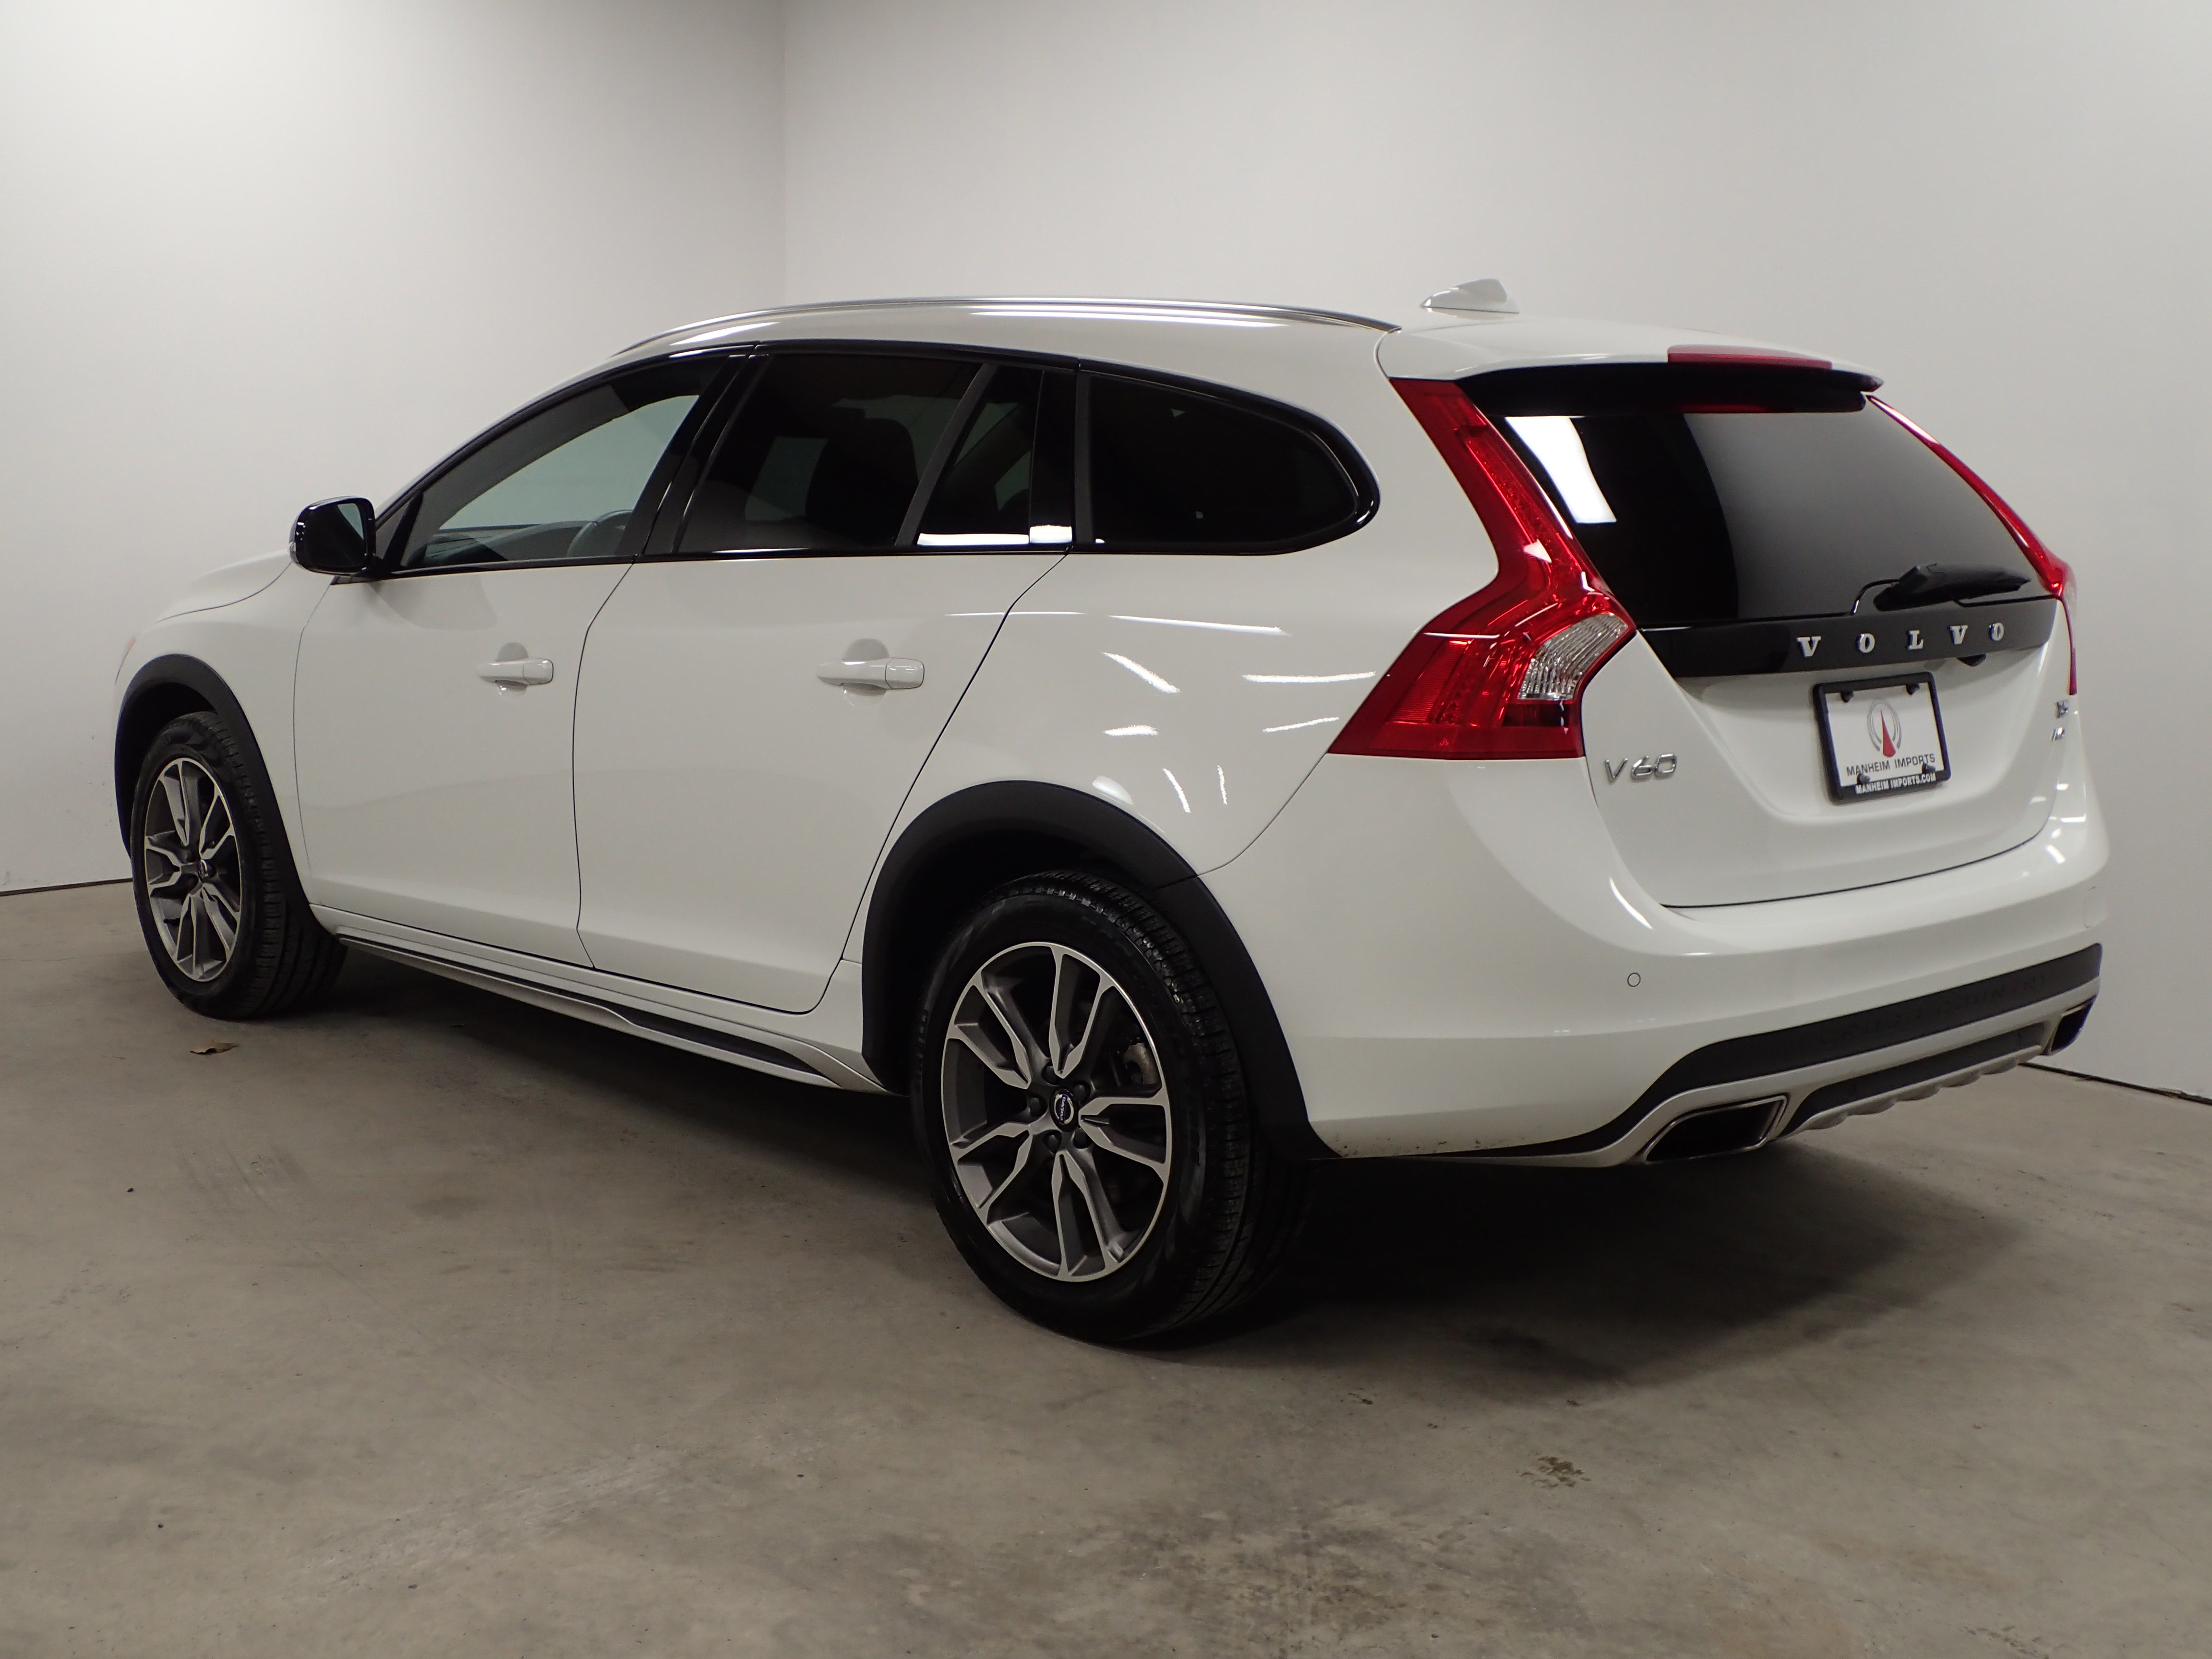 PreOwned 2018 Volvo V60 Cross Country Station Wagon in